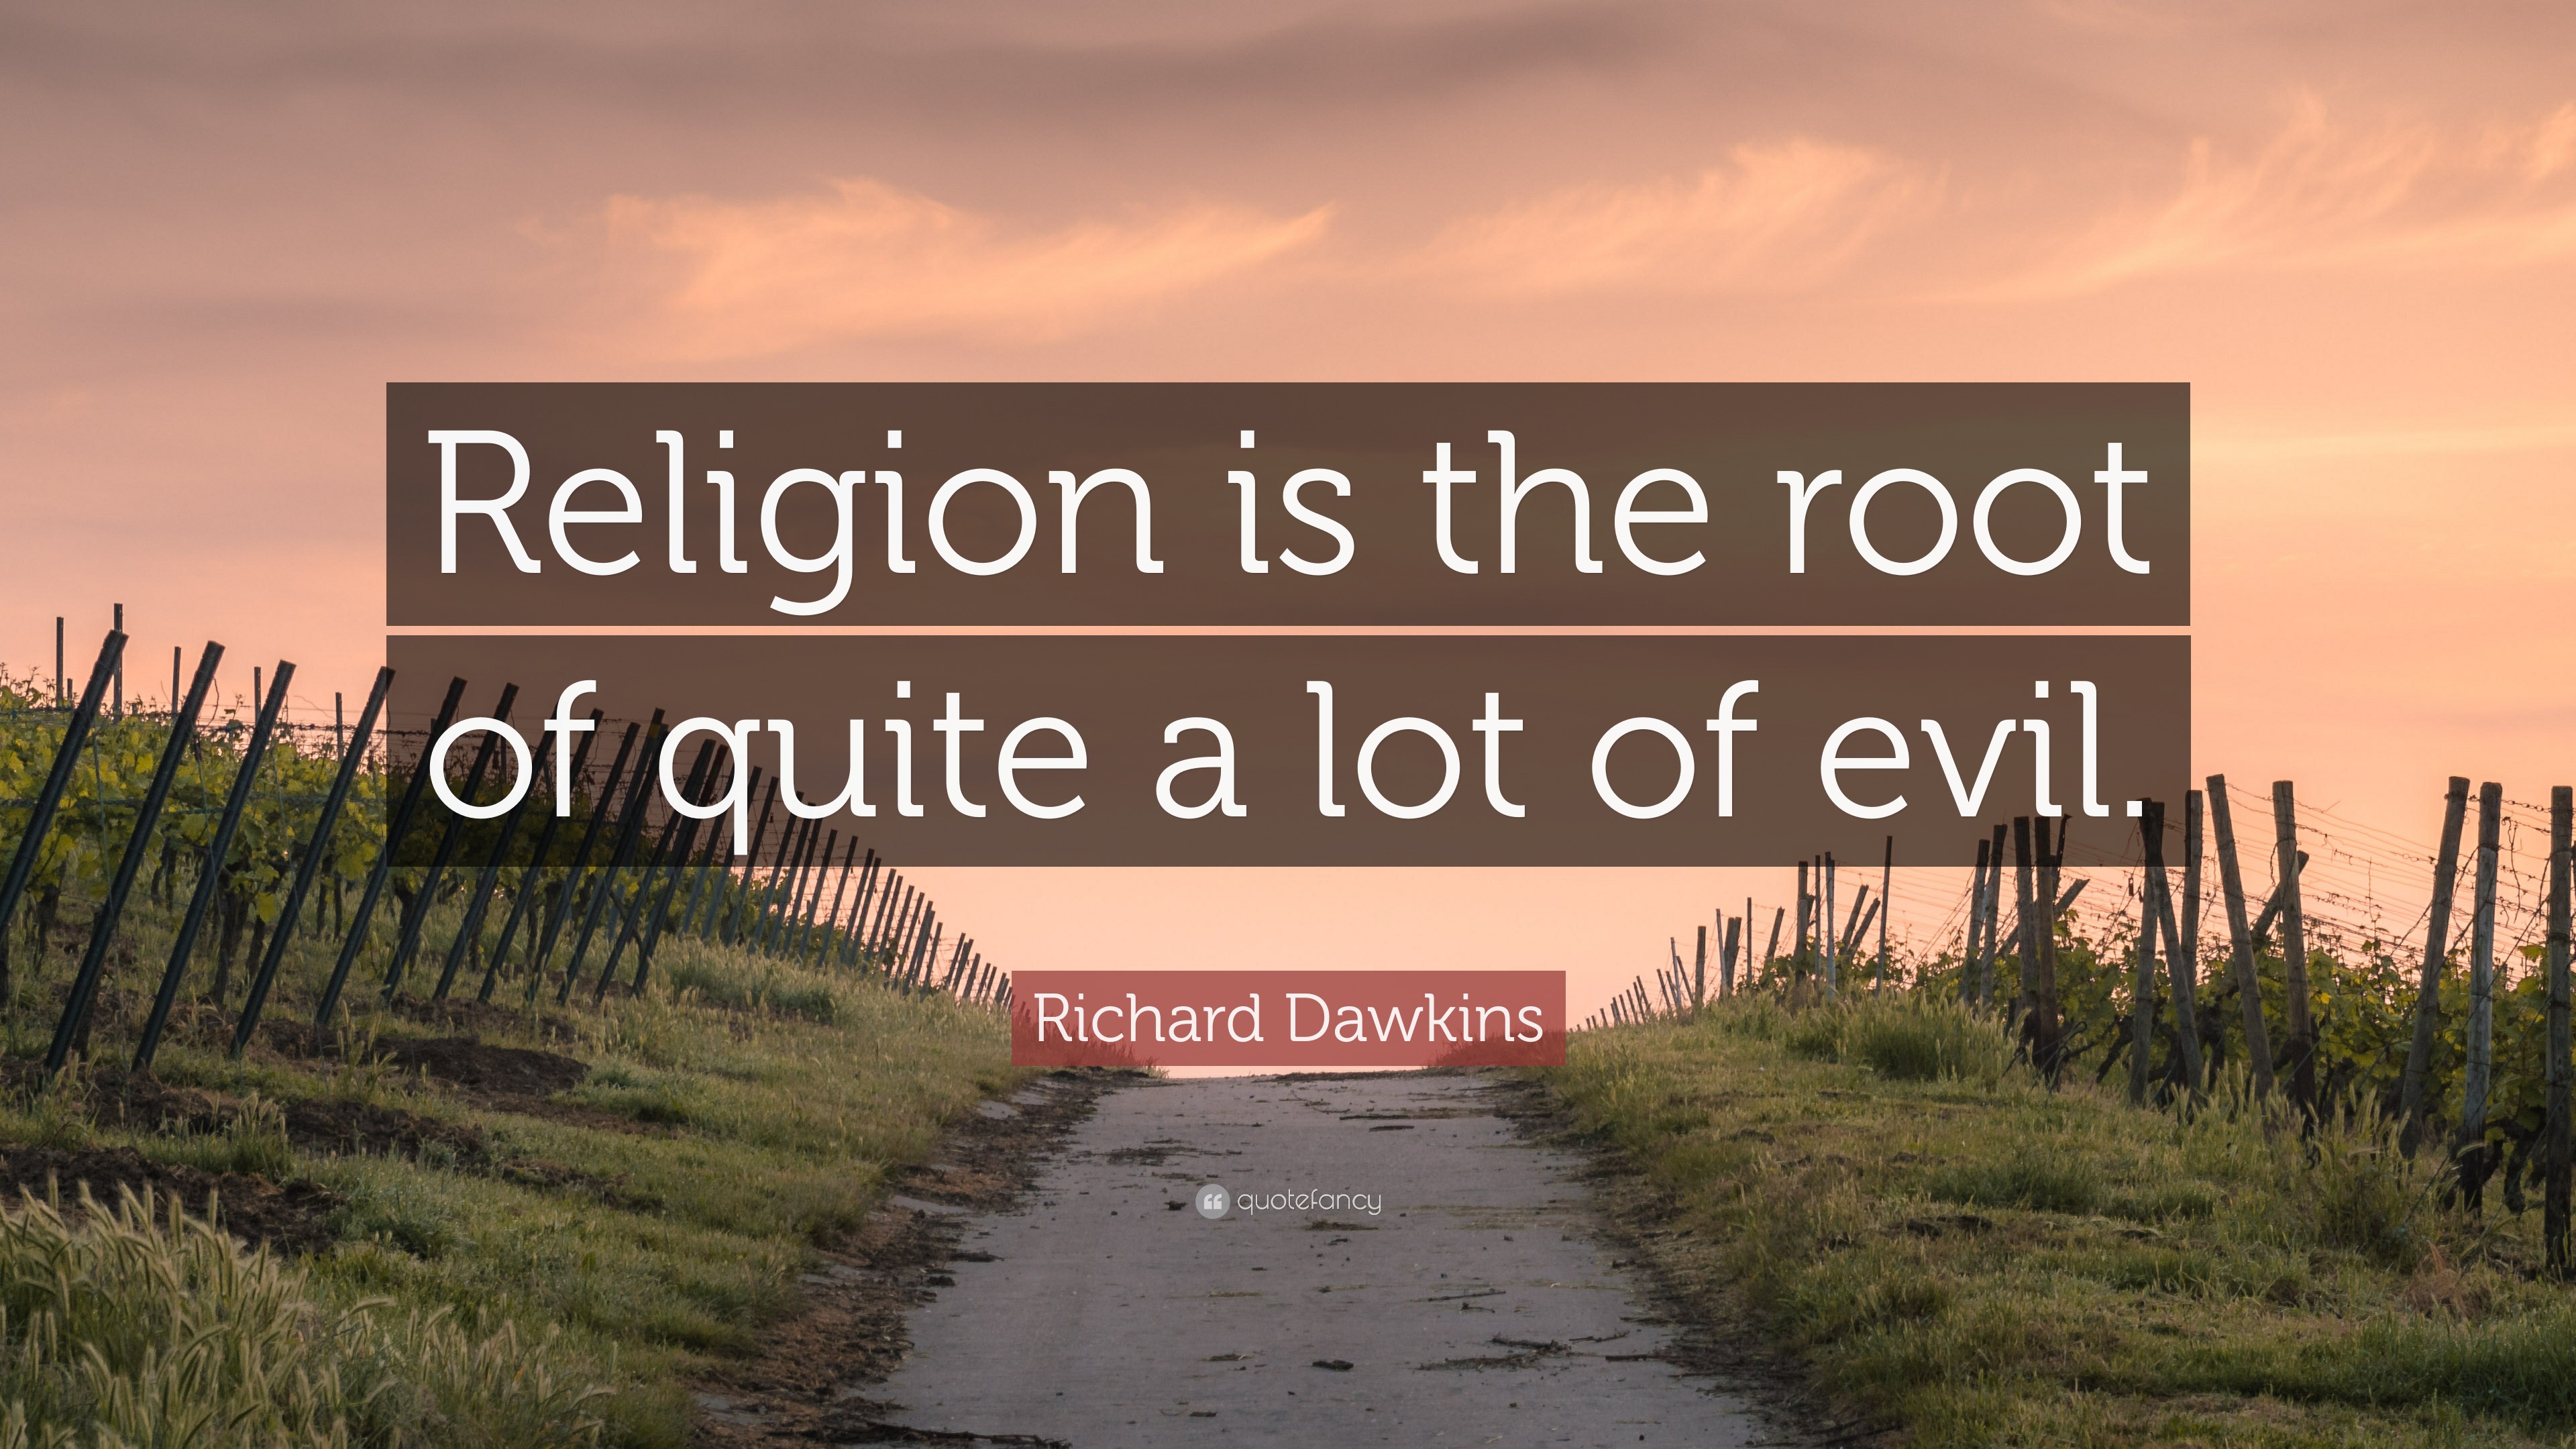 Richard Dawkins Quote: “Religion is the root of quite a lot of evil.”